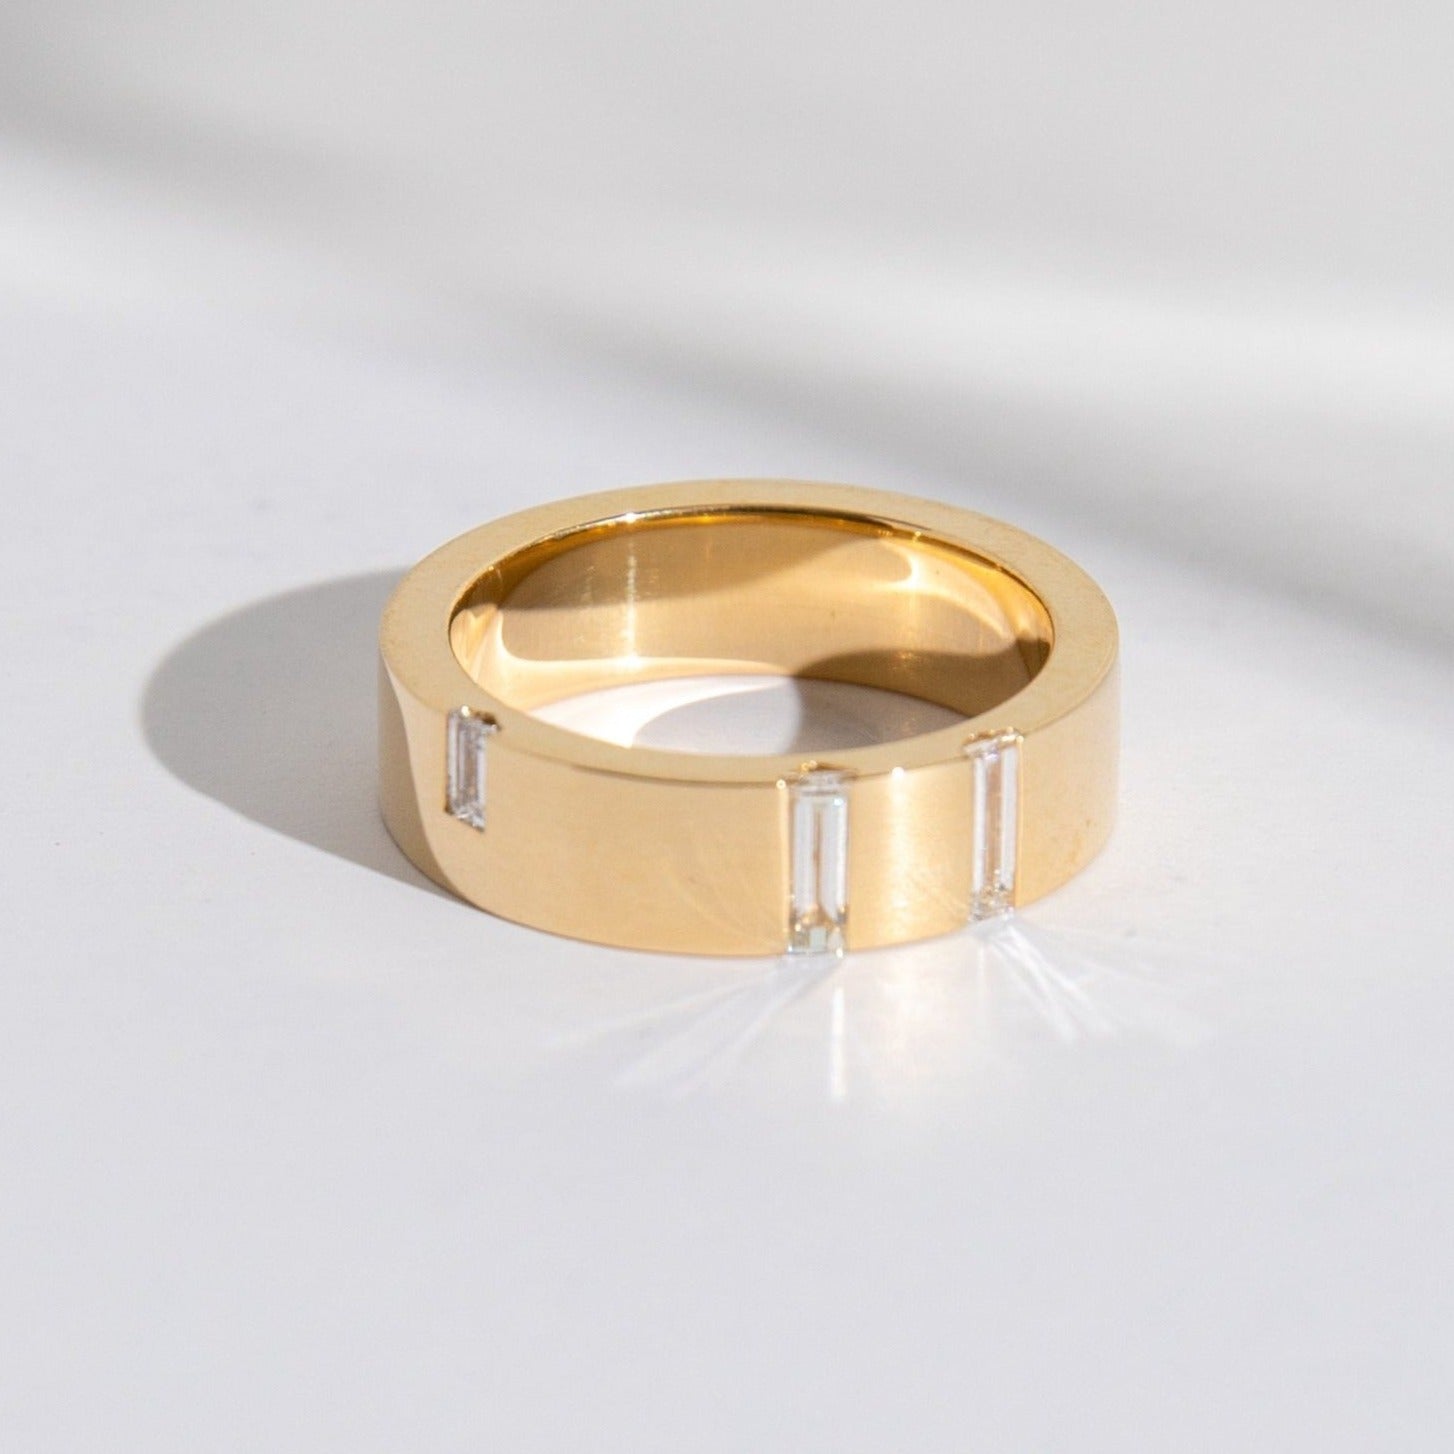 Irdi Unique Ring in 14k Gold set with White Diamonds by SHW Jewelry